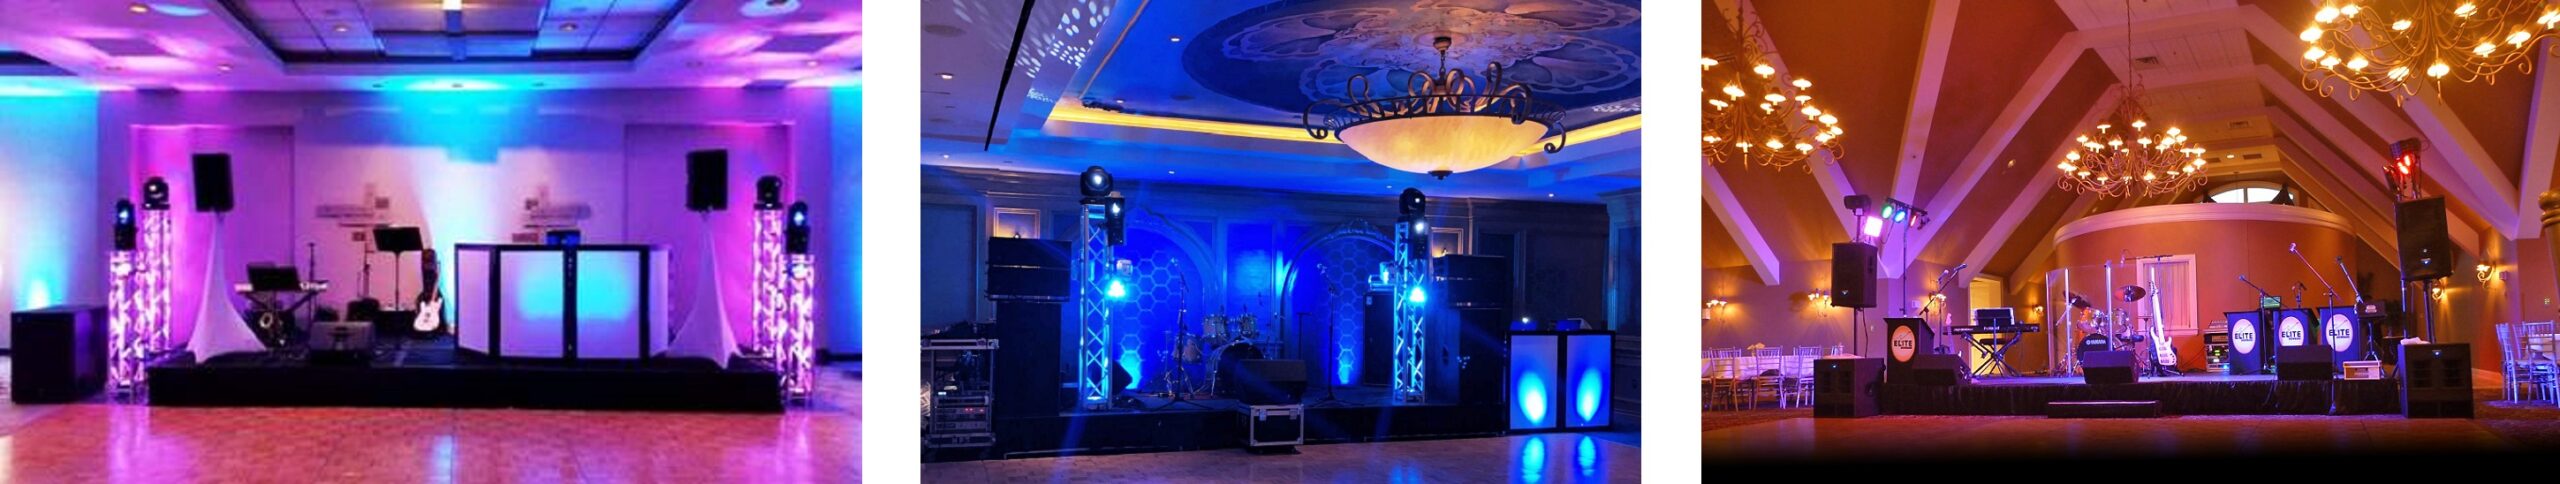 Houston Sound Reinforcement, Stage, Audio, engineer, technician, Sound system, Live music, band, monitors, speakers, subwoofers, Houston DJ, DJs in Houston, Sonido DJ Sammy De Houston, Awesome Music Entertainment, Awesome Event Pros, AME DJs